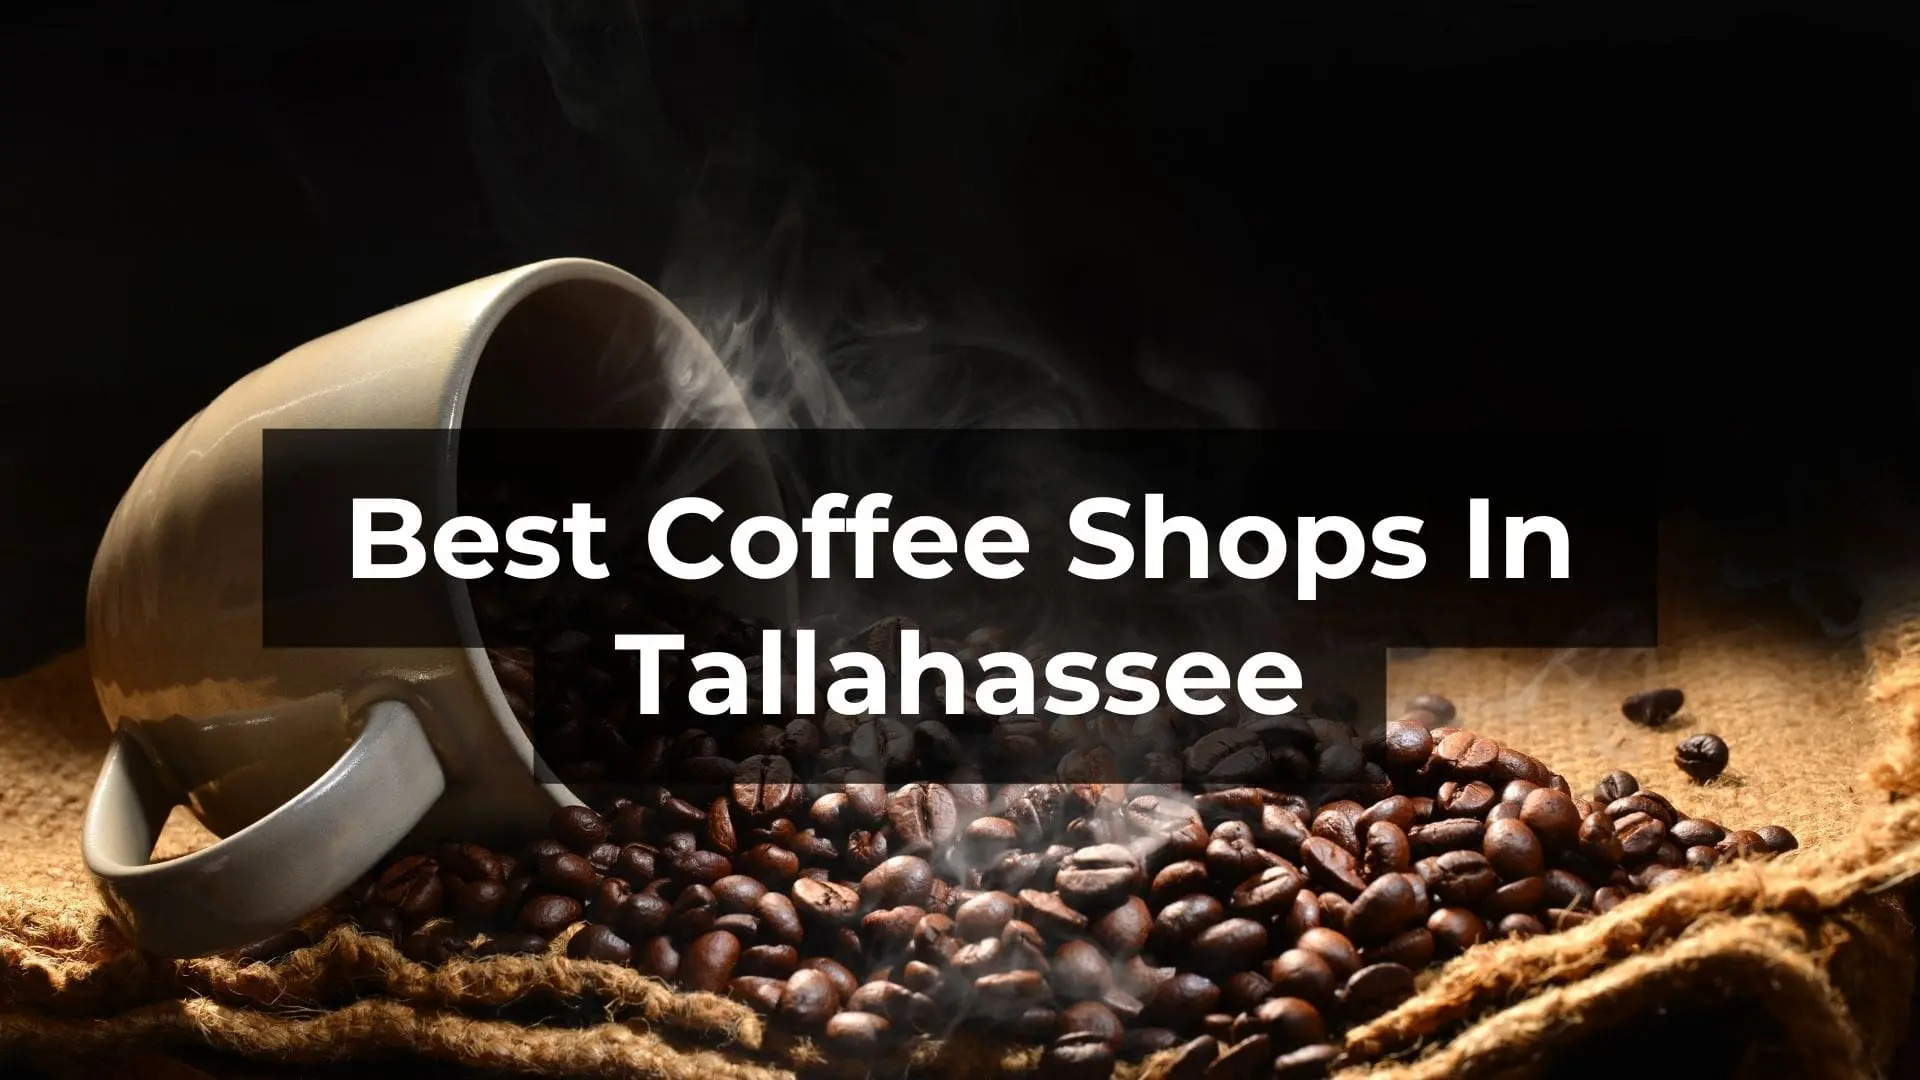 The Best Coffee Shops in Tallahassee